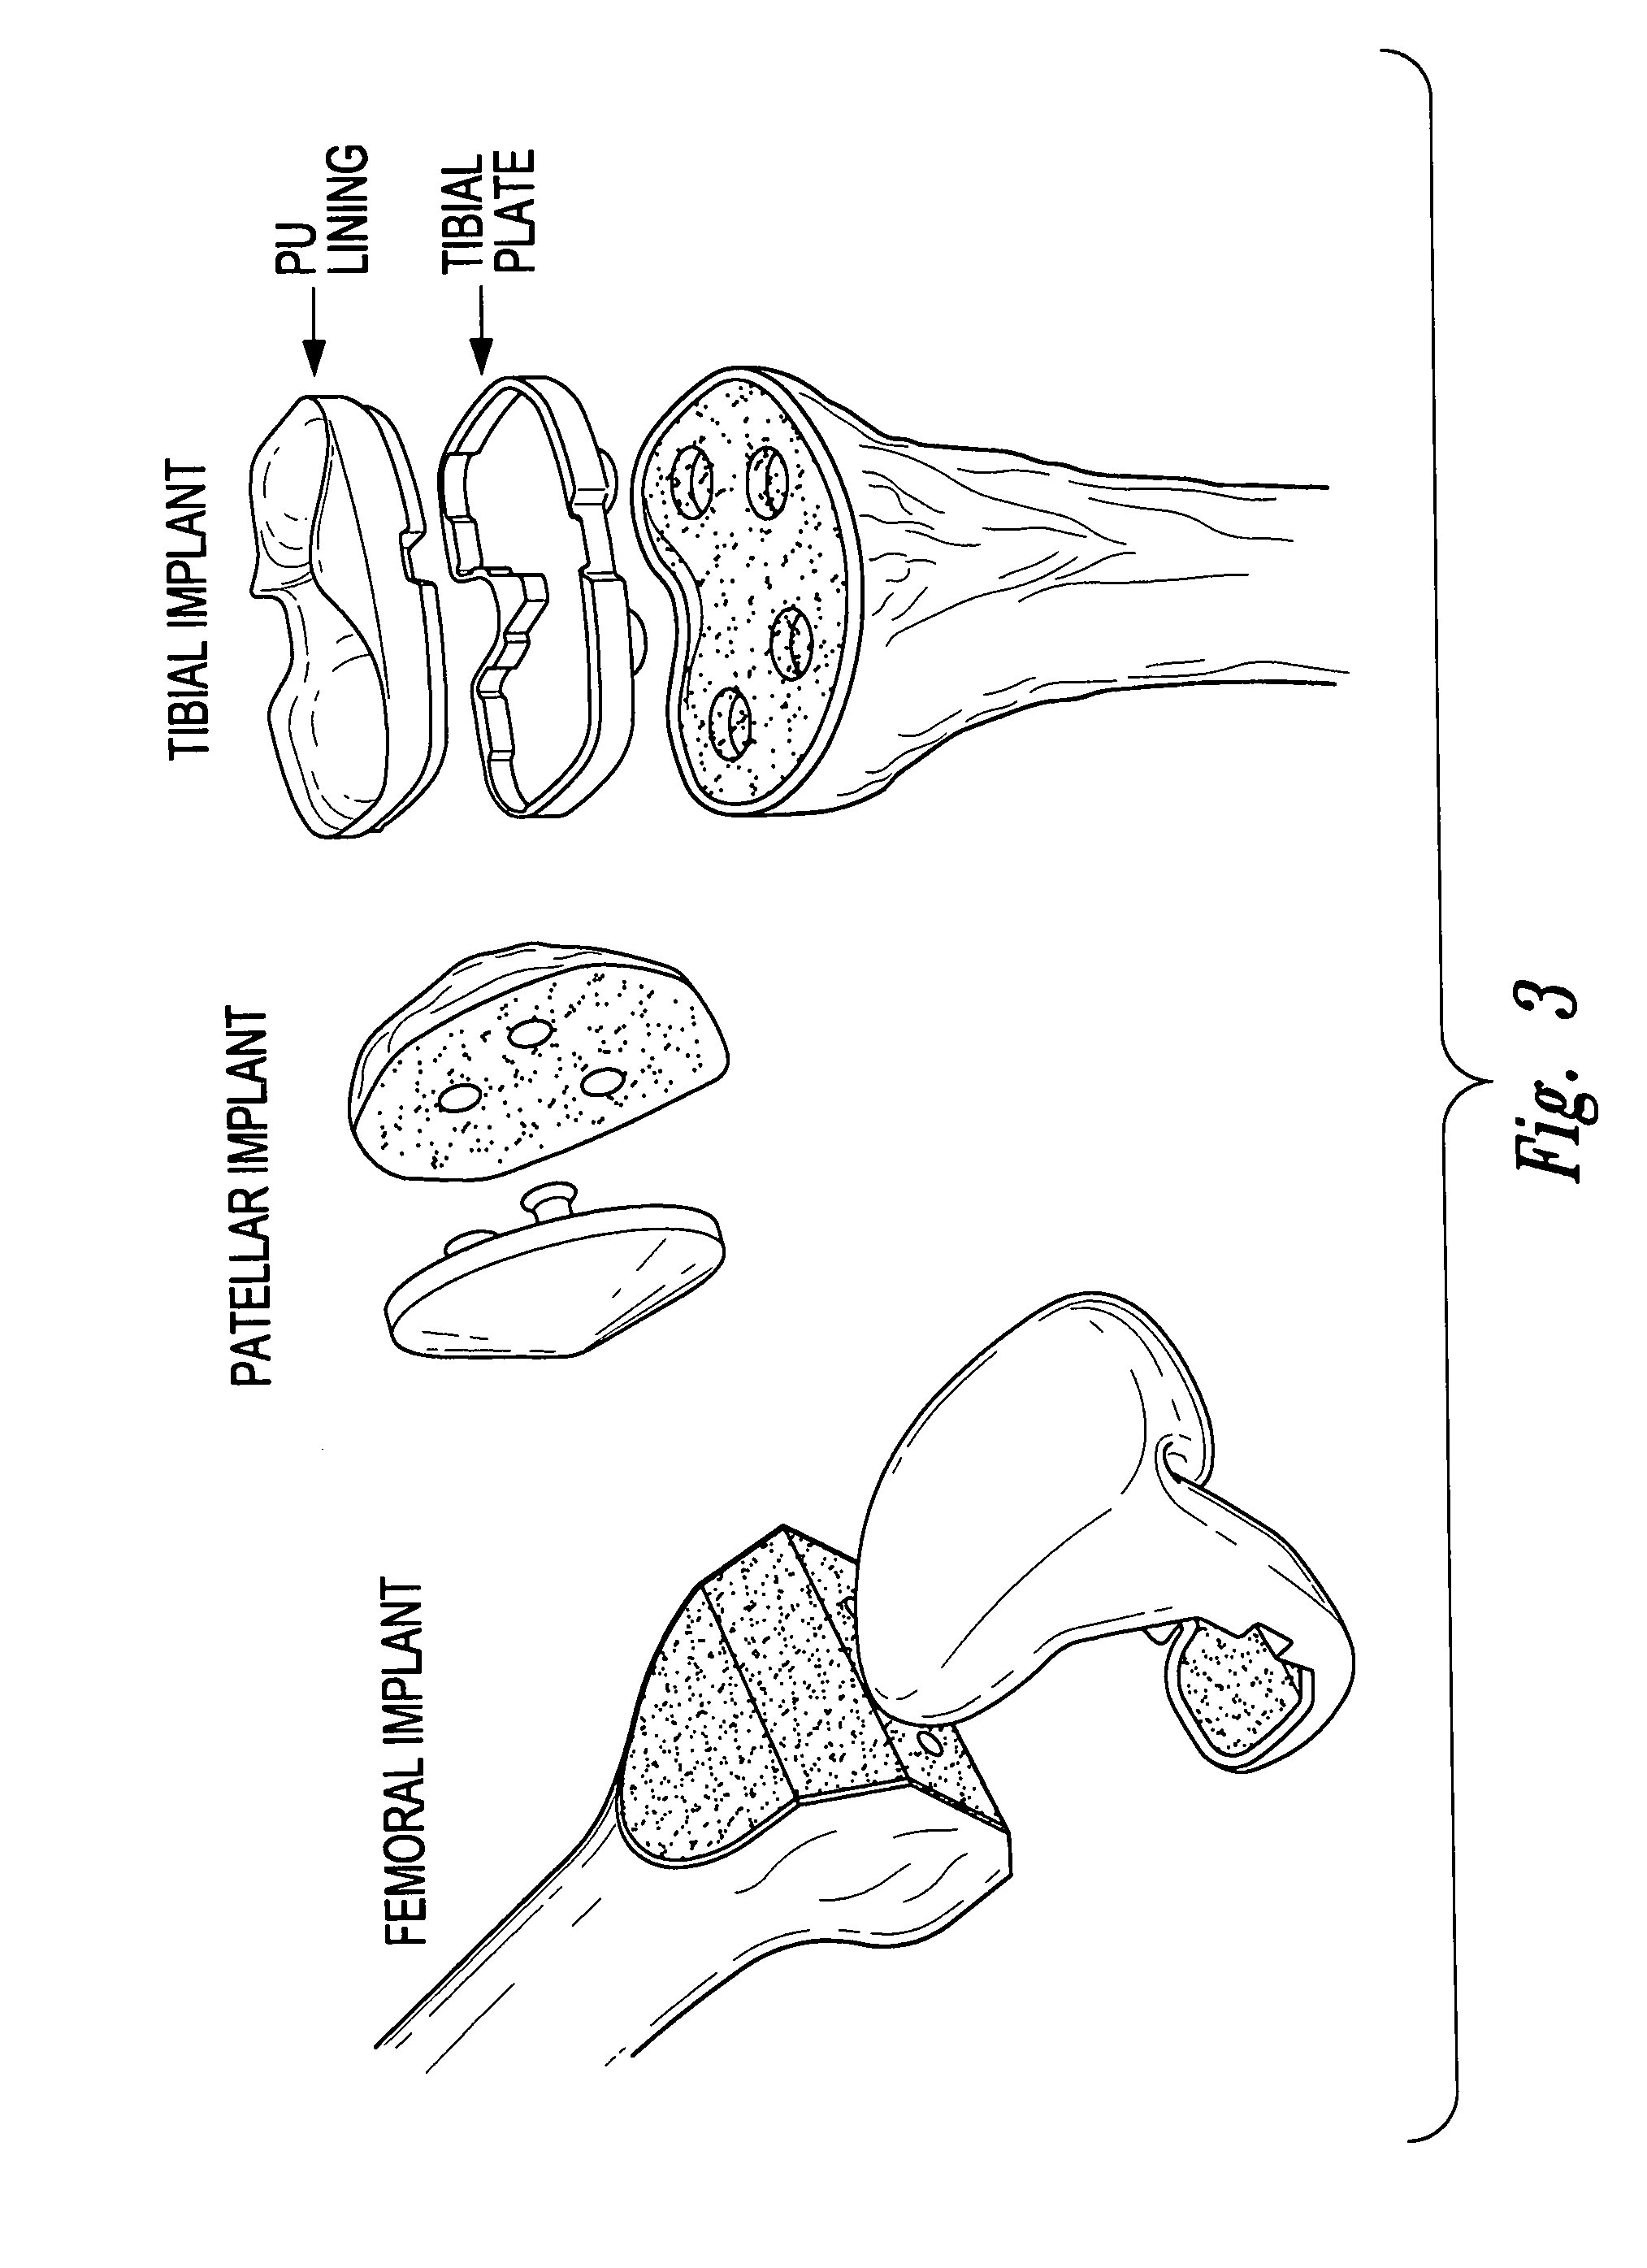 Devices, systems and methods for monitoring knee replacements